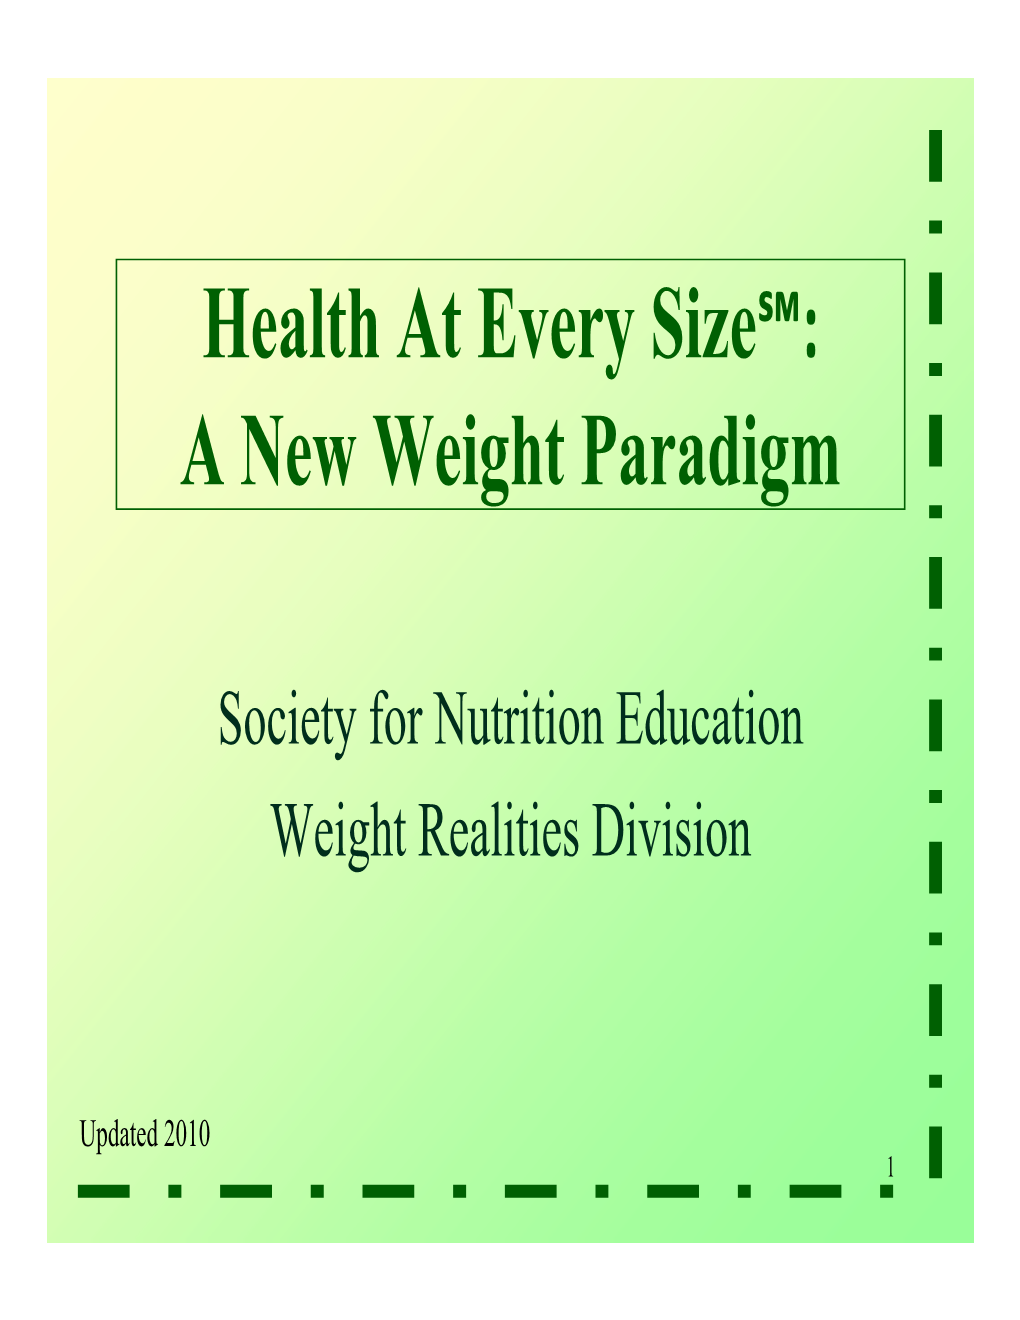 Health at Every Size℠: a New Weight Paradigm